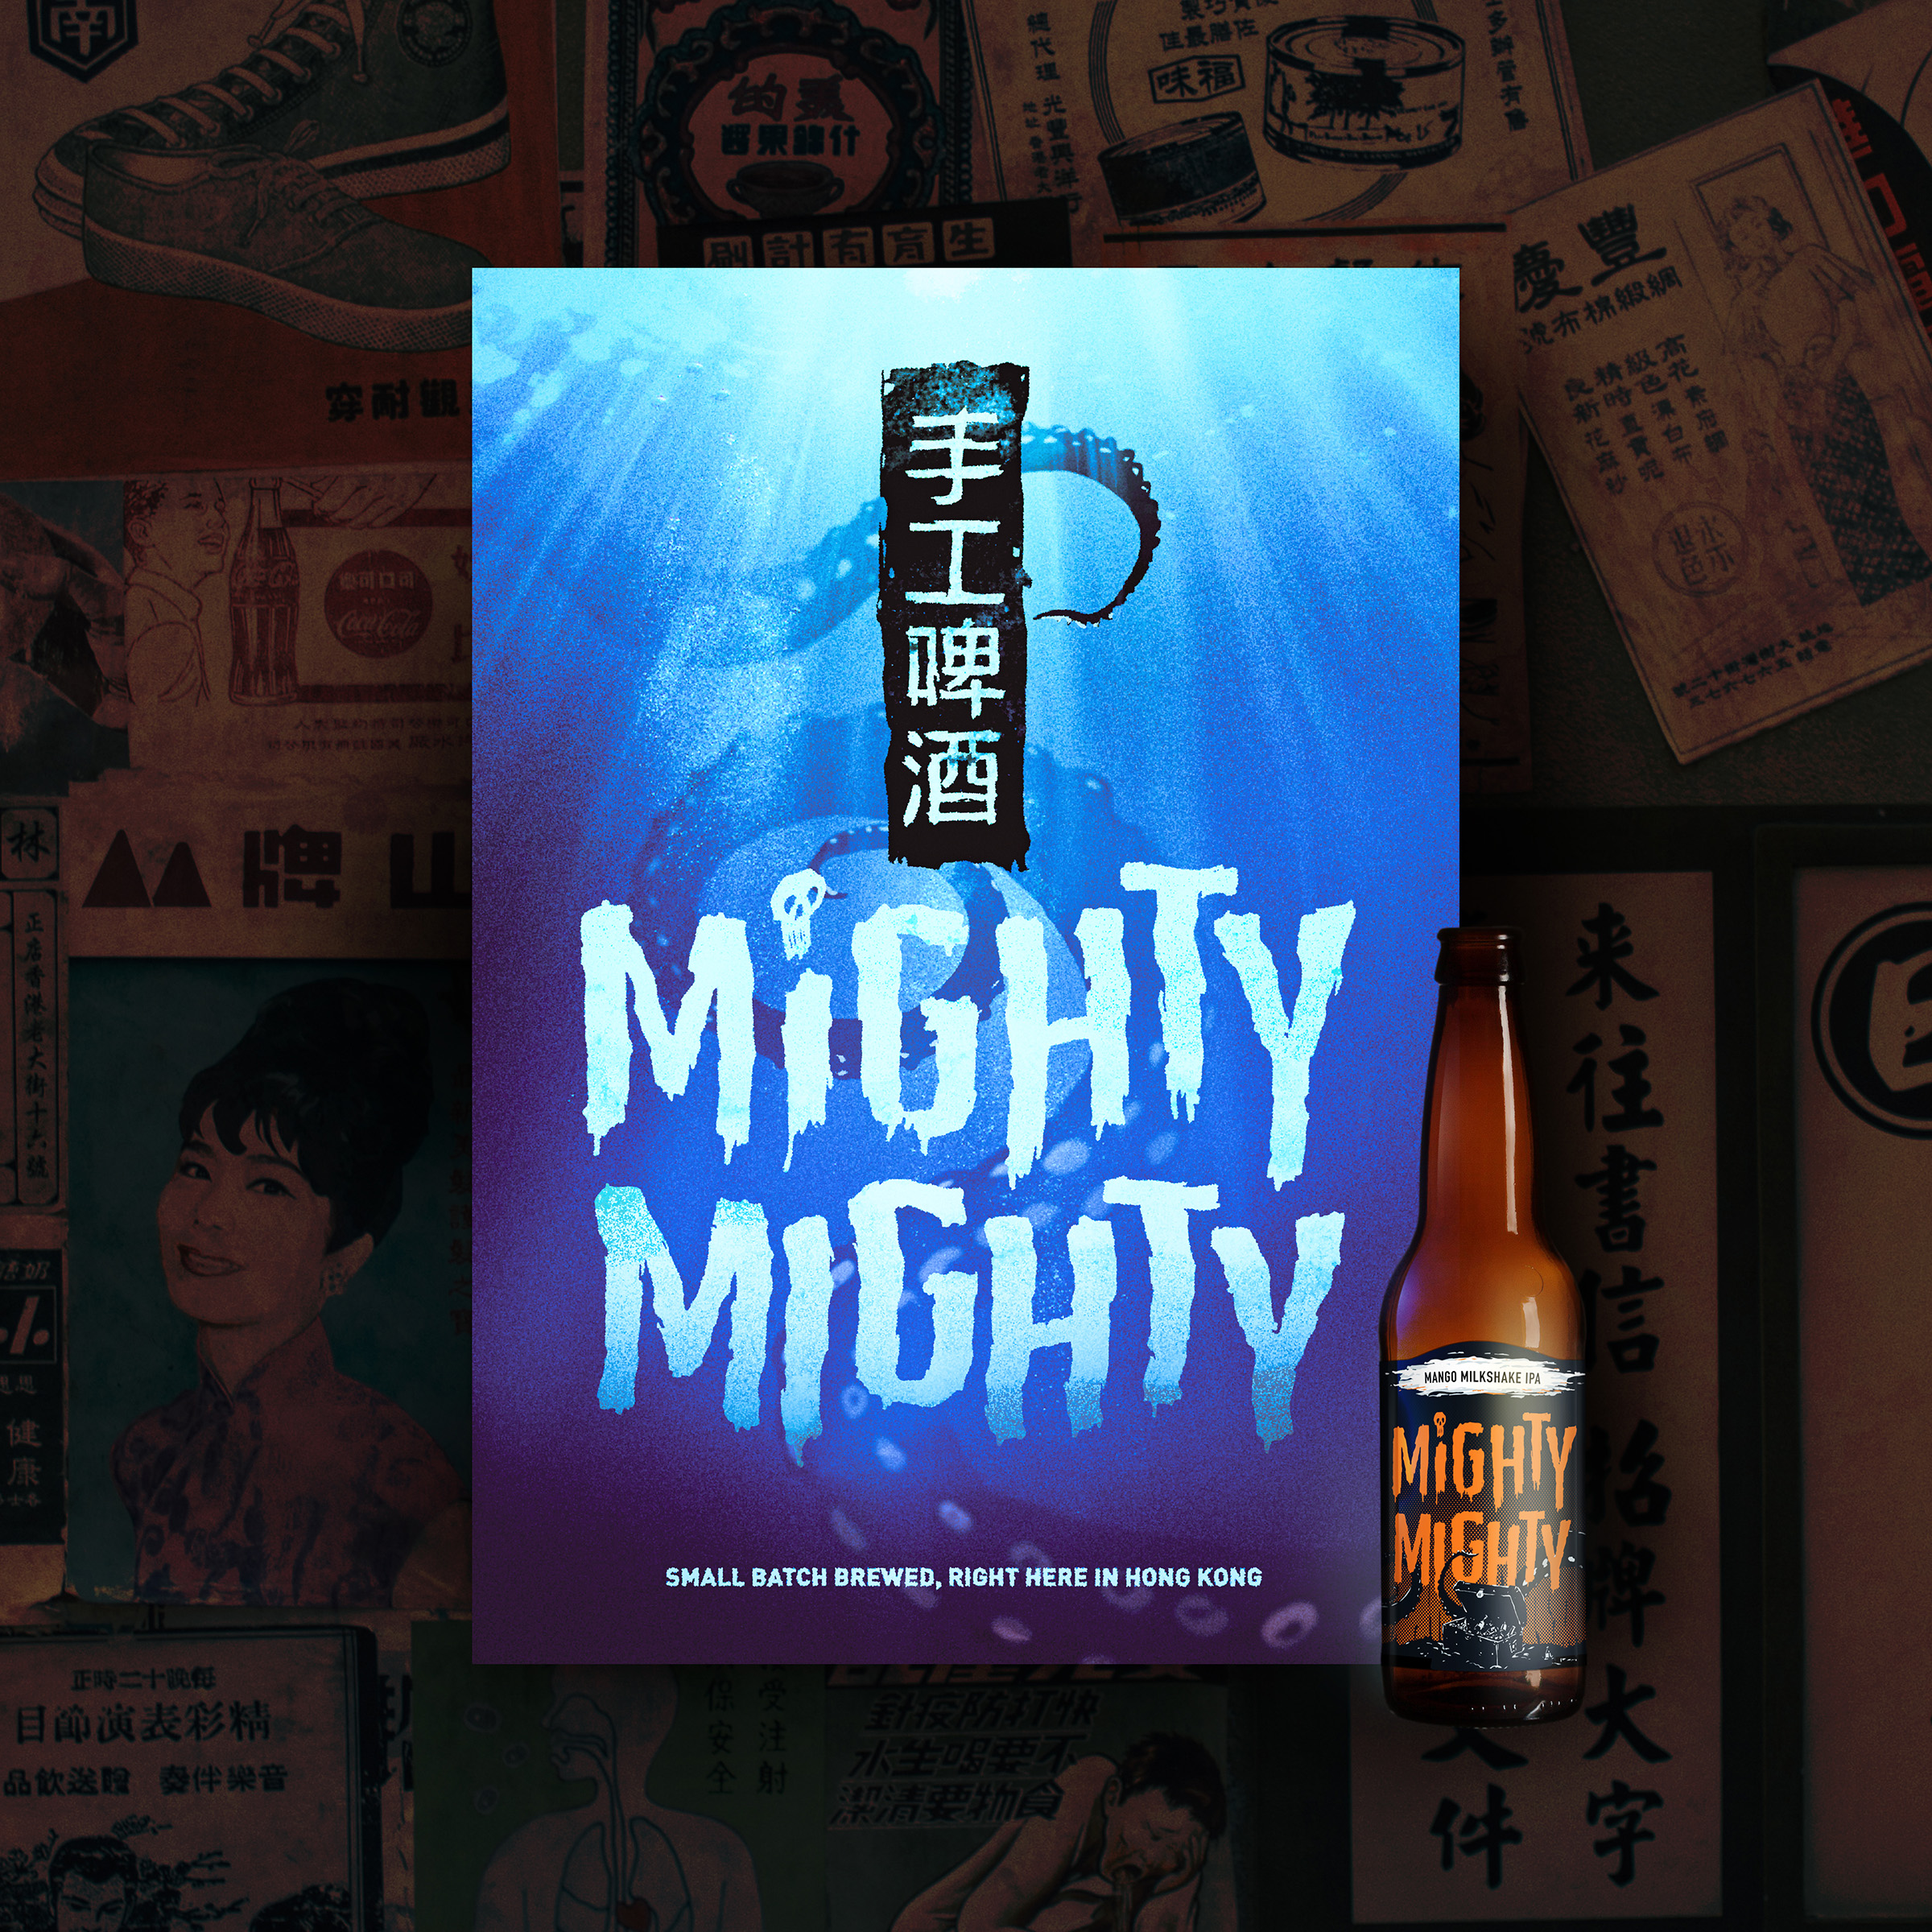 MightyMighty - Hong Kong Craft Beer label designs